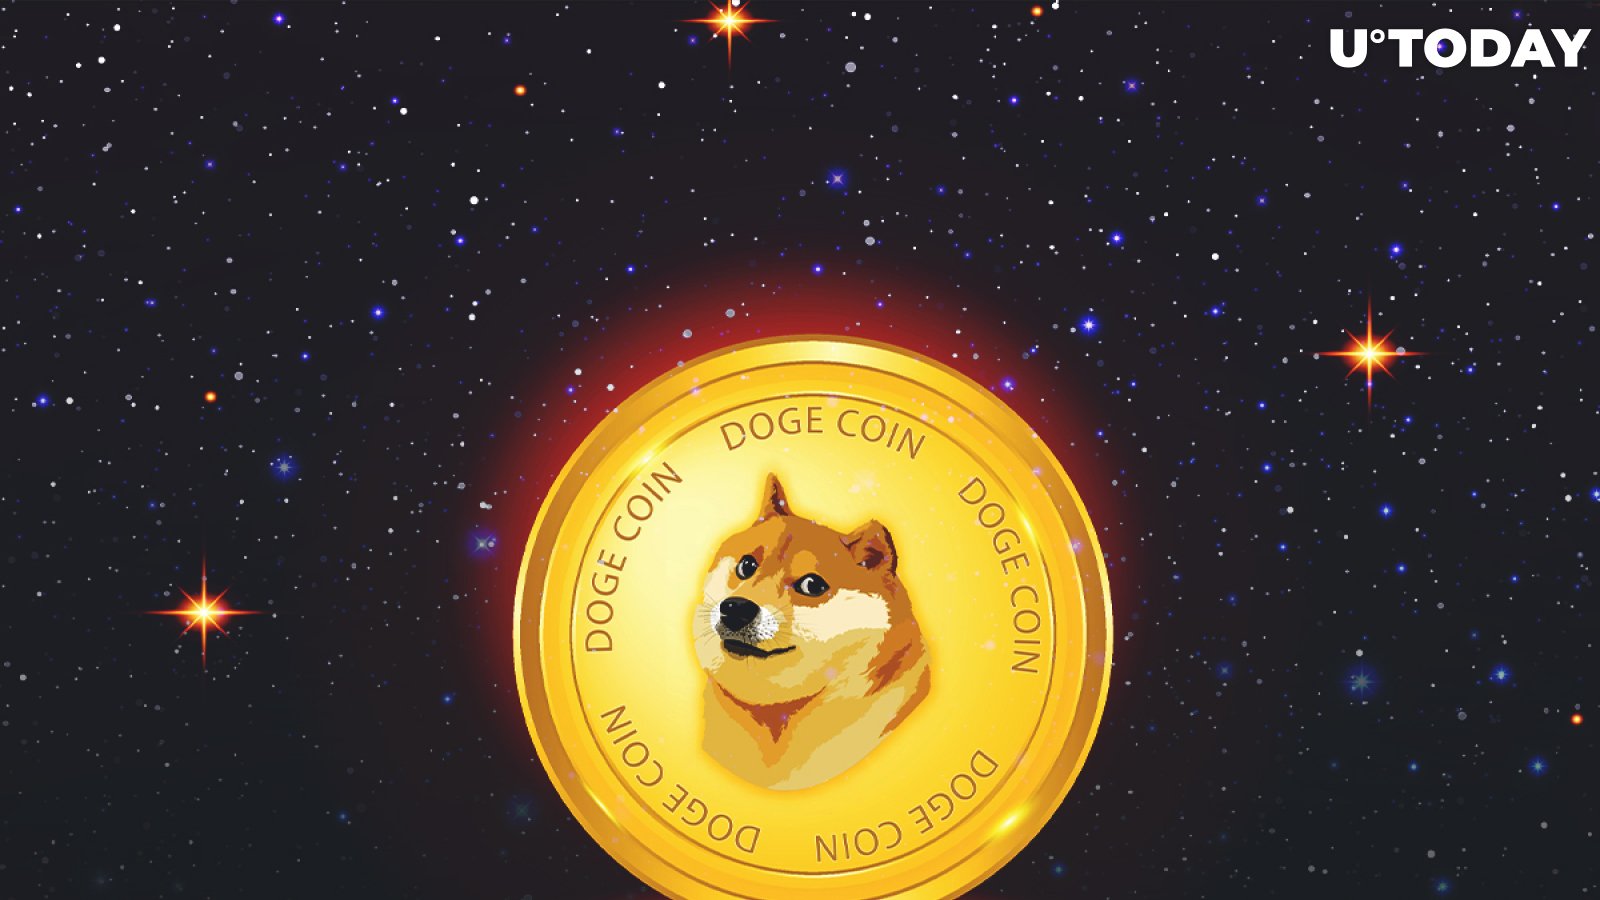 Elon Musk Names His Goal for Space Flight, But Dogecoin Community Reminds Him of His DOGE-Moon Promise